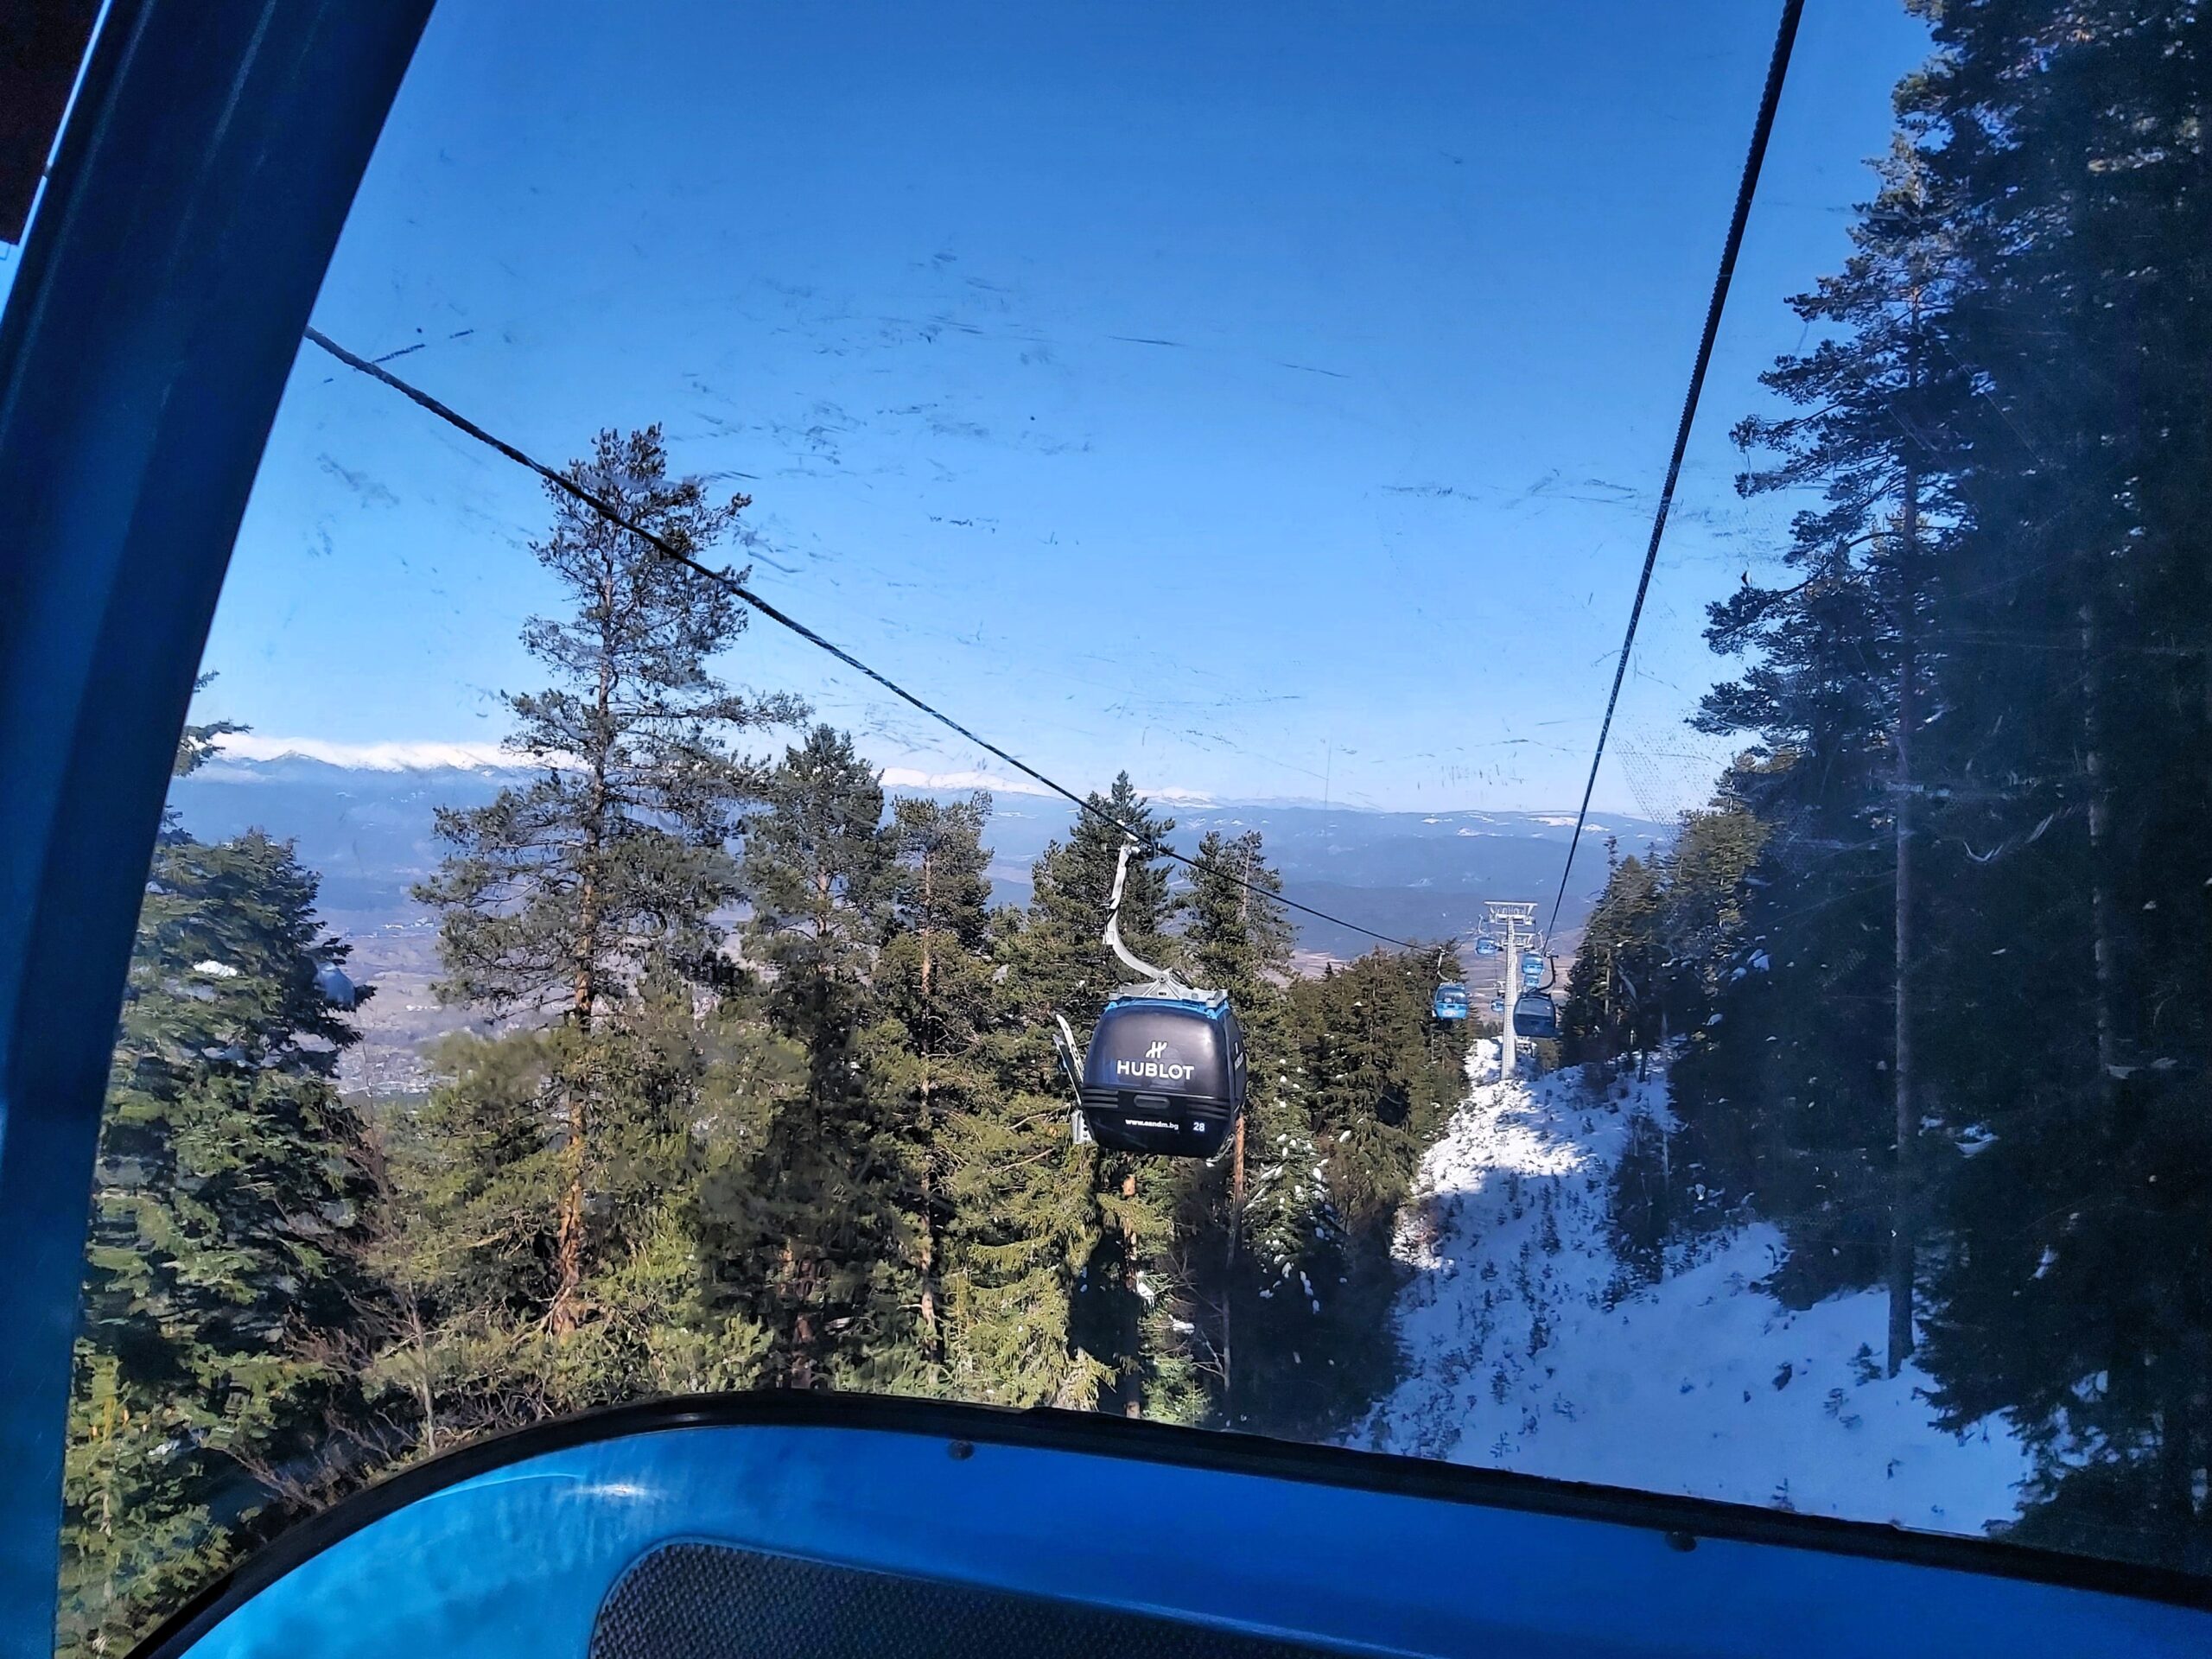 A view from the gondola going down the mountain in Bansko, Bulgaria